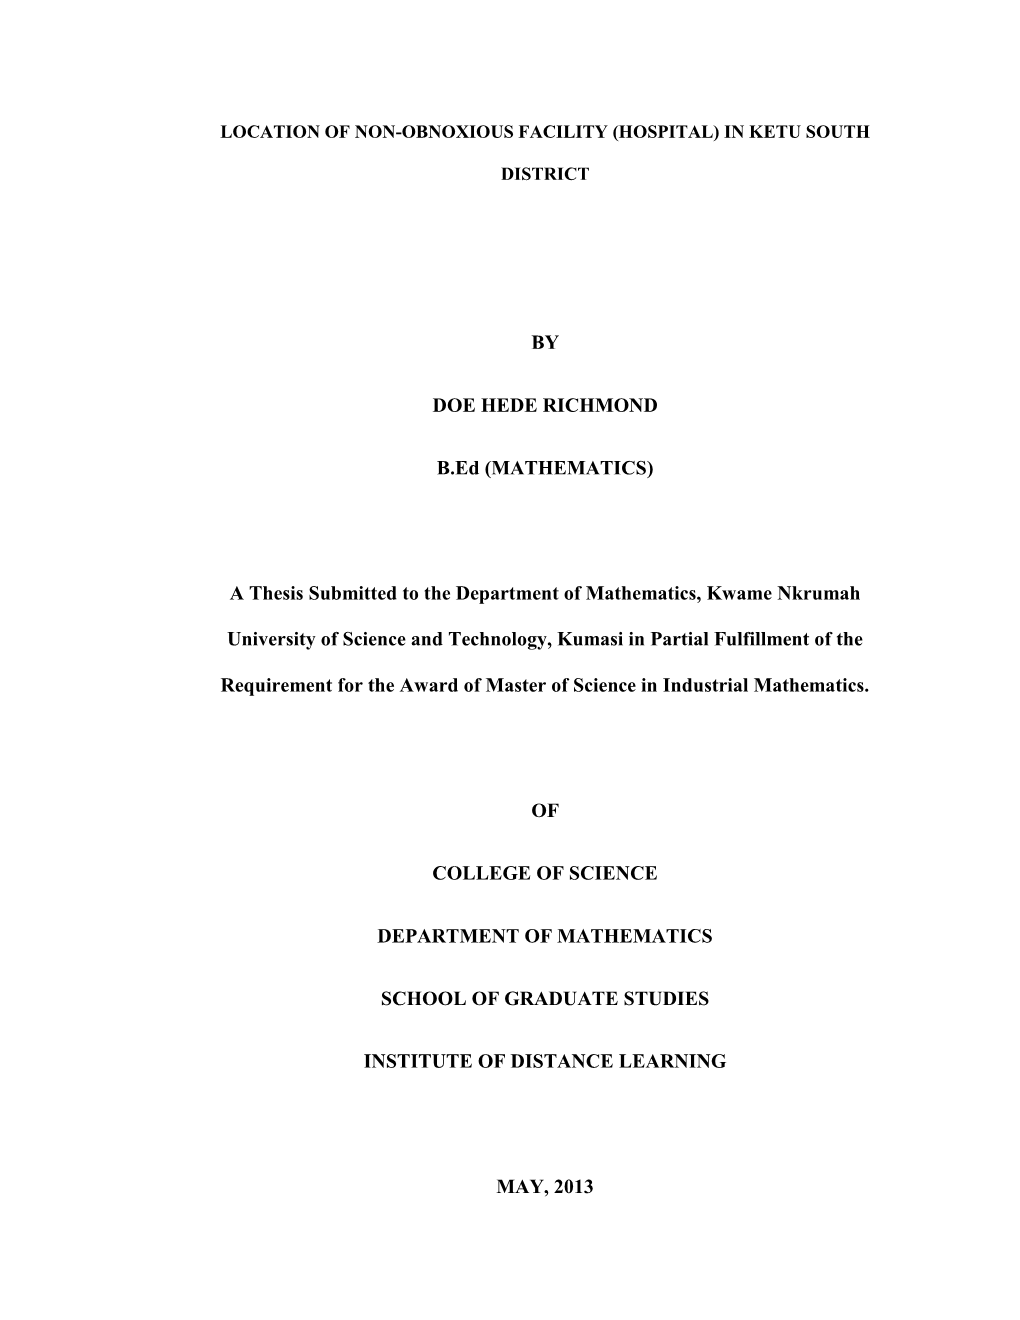 BY DOE HEDE RICHMOND B.Ed (MATHEMATICS) a Thesis